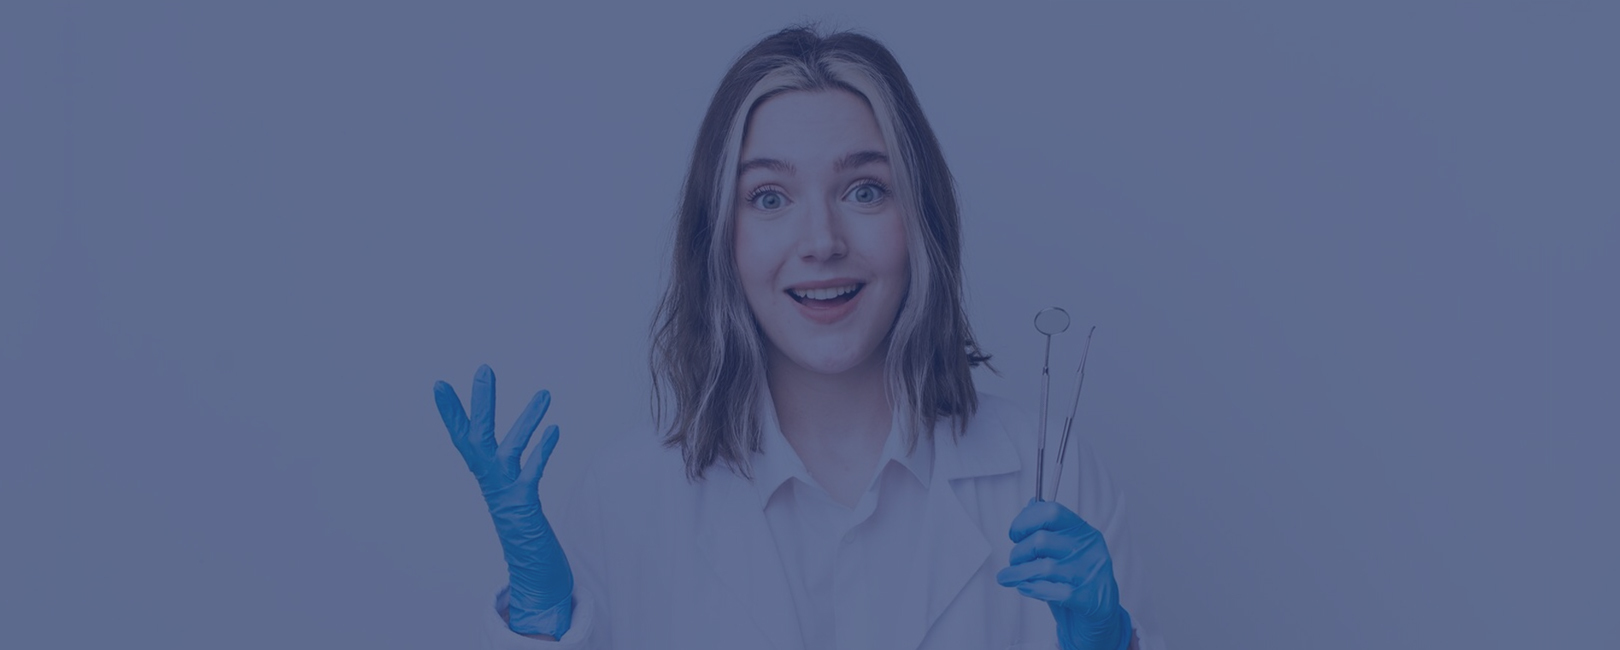 Dentist in scrubs holding clear aligners with a surprised expression.